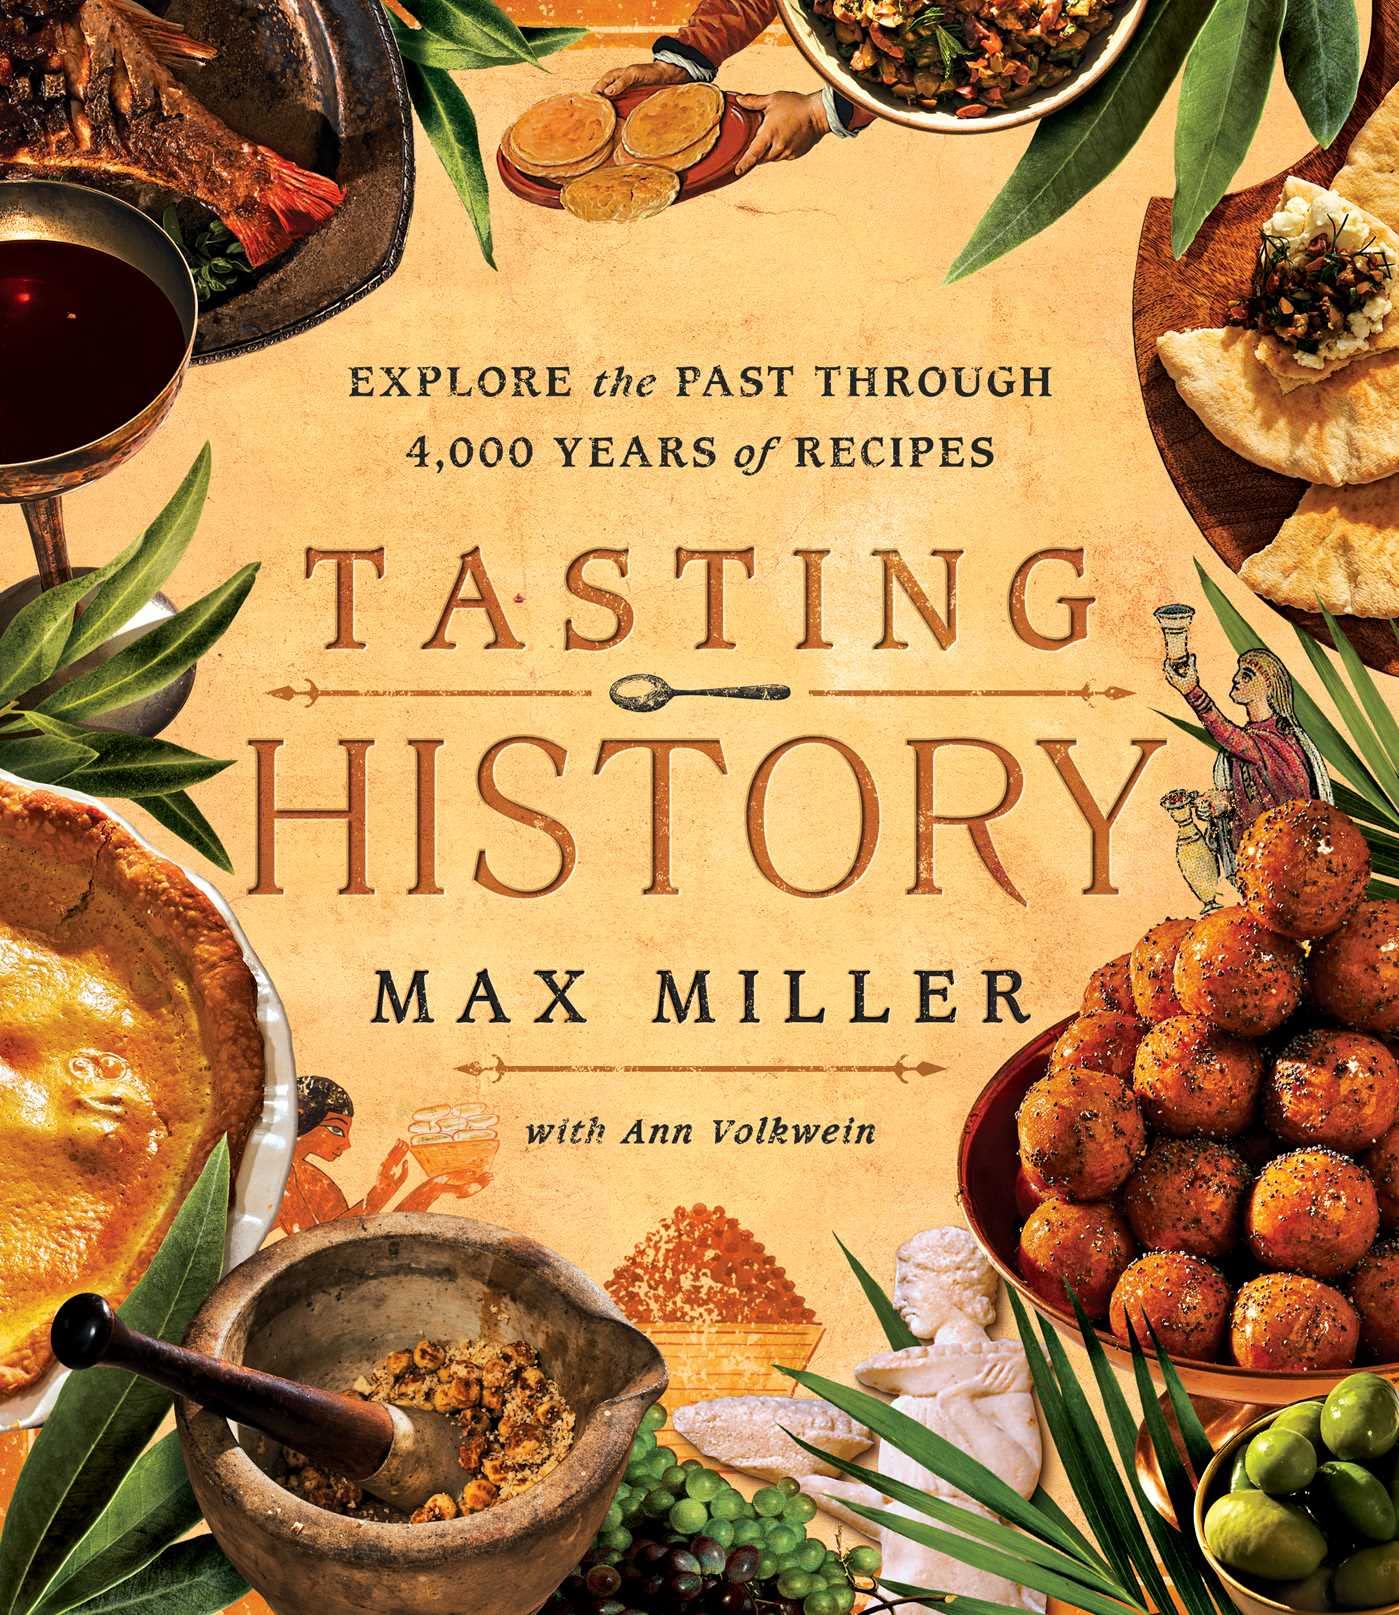 Tasting History: Explore the Past through 4,000 Years of Recipes (Max Miller, Ann Volkwein)